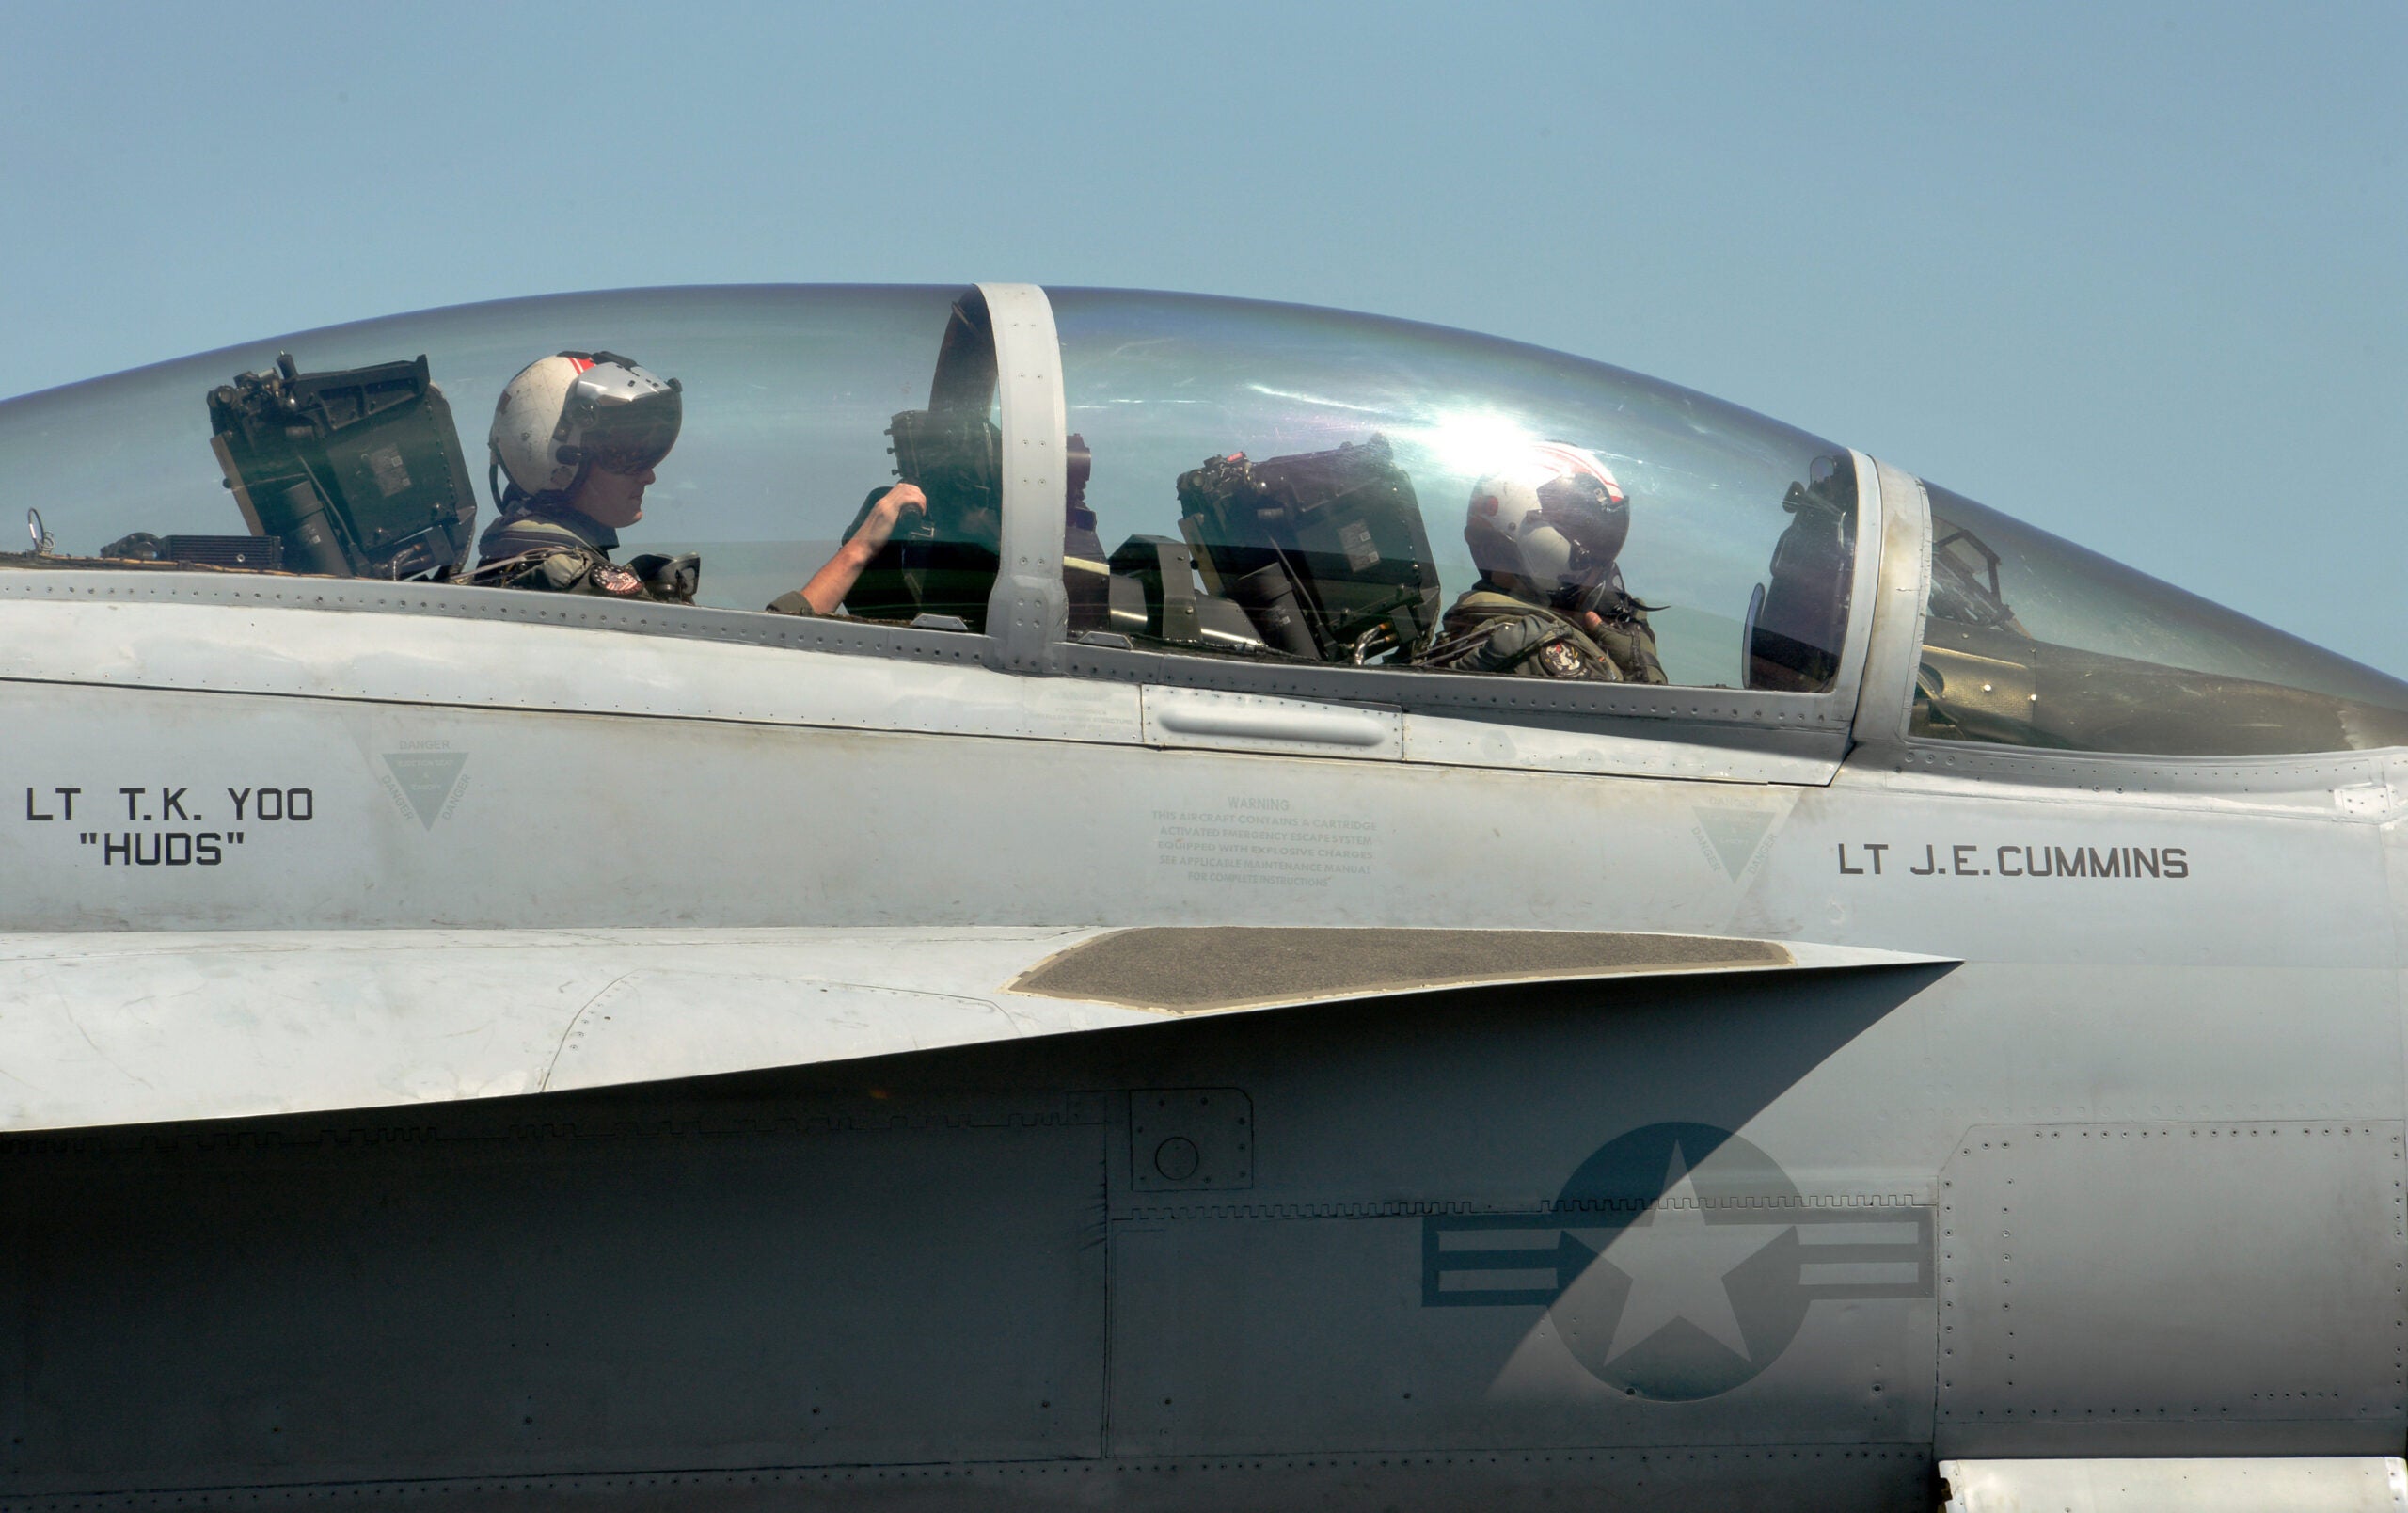 A U.S. Navy F-18F Super Hornet from VFA-41 squadron, based out of Naval Air Station Lemoore, Calif., prepares for an afternoon sortie at the Portland Air National Guard Base, Portland, Ore., during dissimilar aircraft combat training (DACT) on Aug. 13, 2019. The two-week training exercise from Aug. 11-23 provides realistic combat scenarios for pilots to hone advanced aerial tactics used against potential adversaries. (Air National Guard photo by Master Sgt. John Hughel, 142nd Fighter Wing Public Affairs)